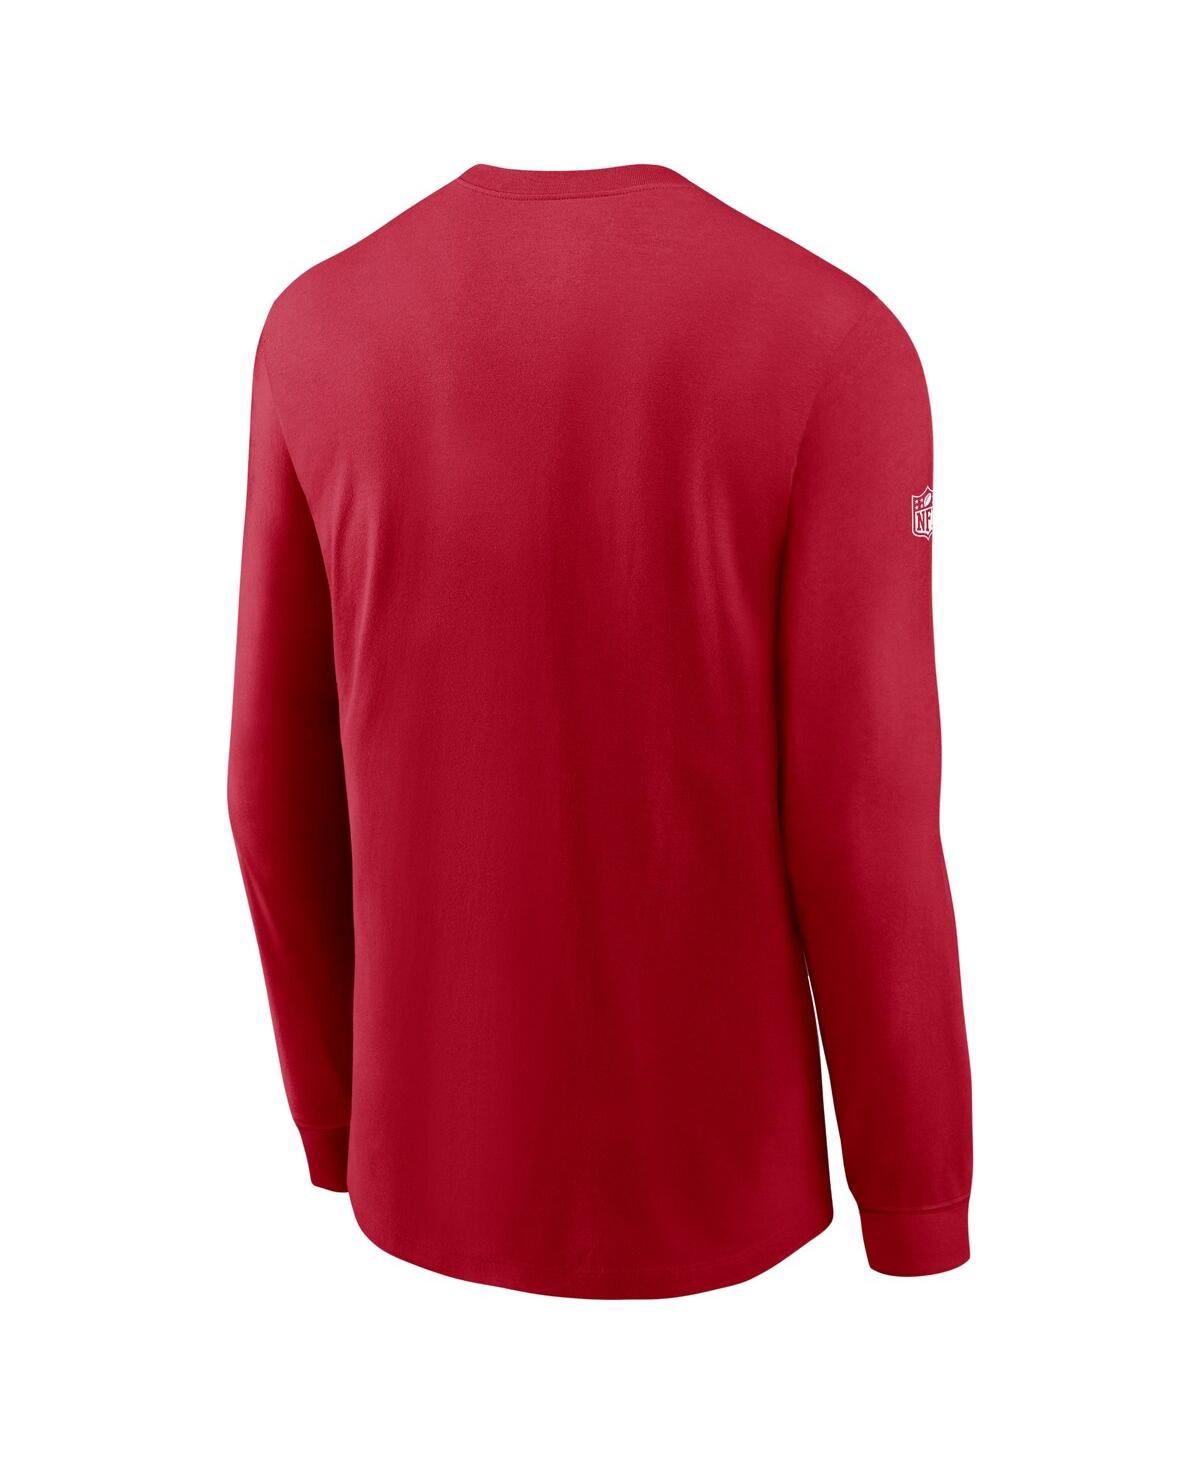 Nike Men's Dri-Fit Sideline Team (NFL Tampa Bay Buccaneers) Long-Sleeve T-Shirt in Red, Size: Small | 00LX6DL8B-0BI